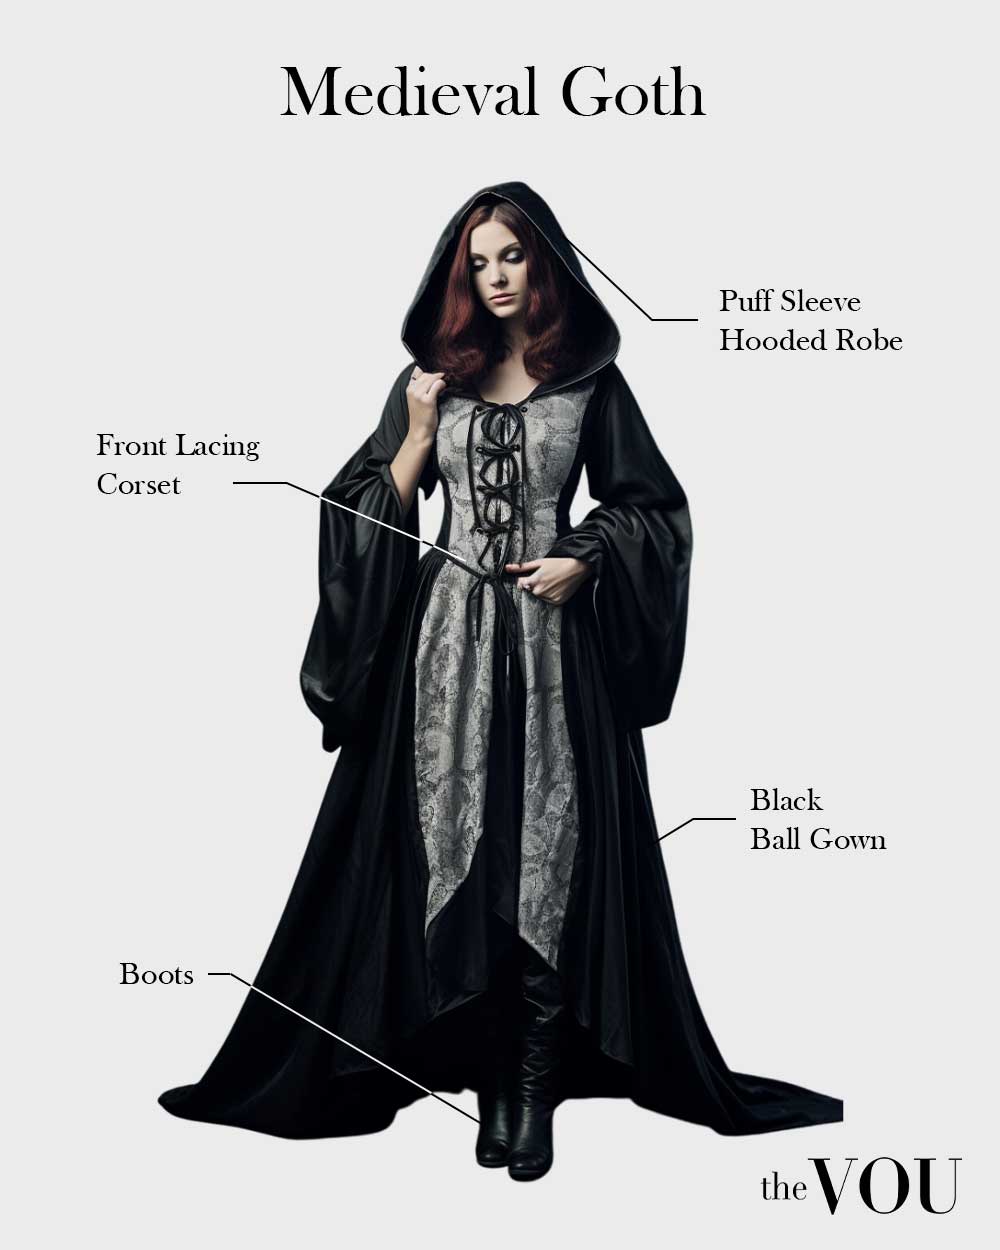 medieval goth outfit elements